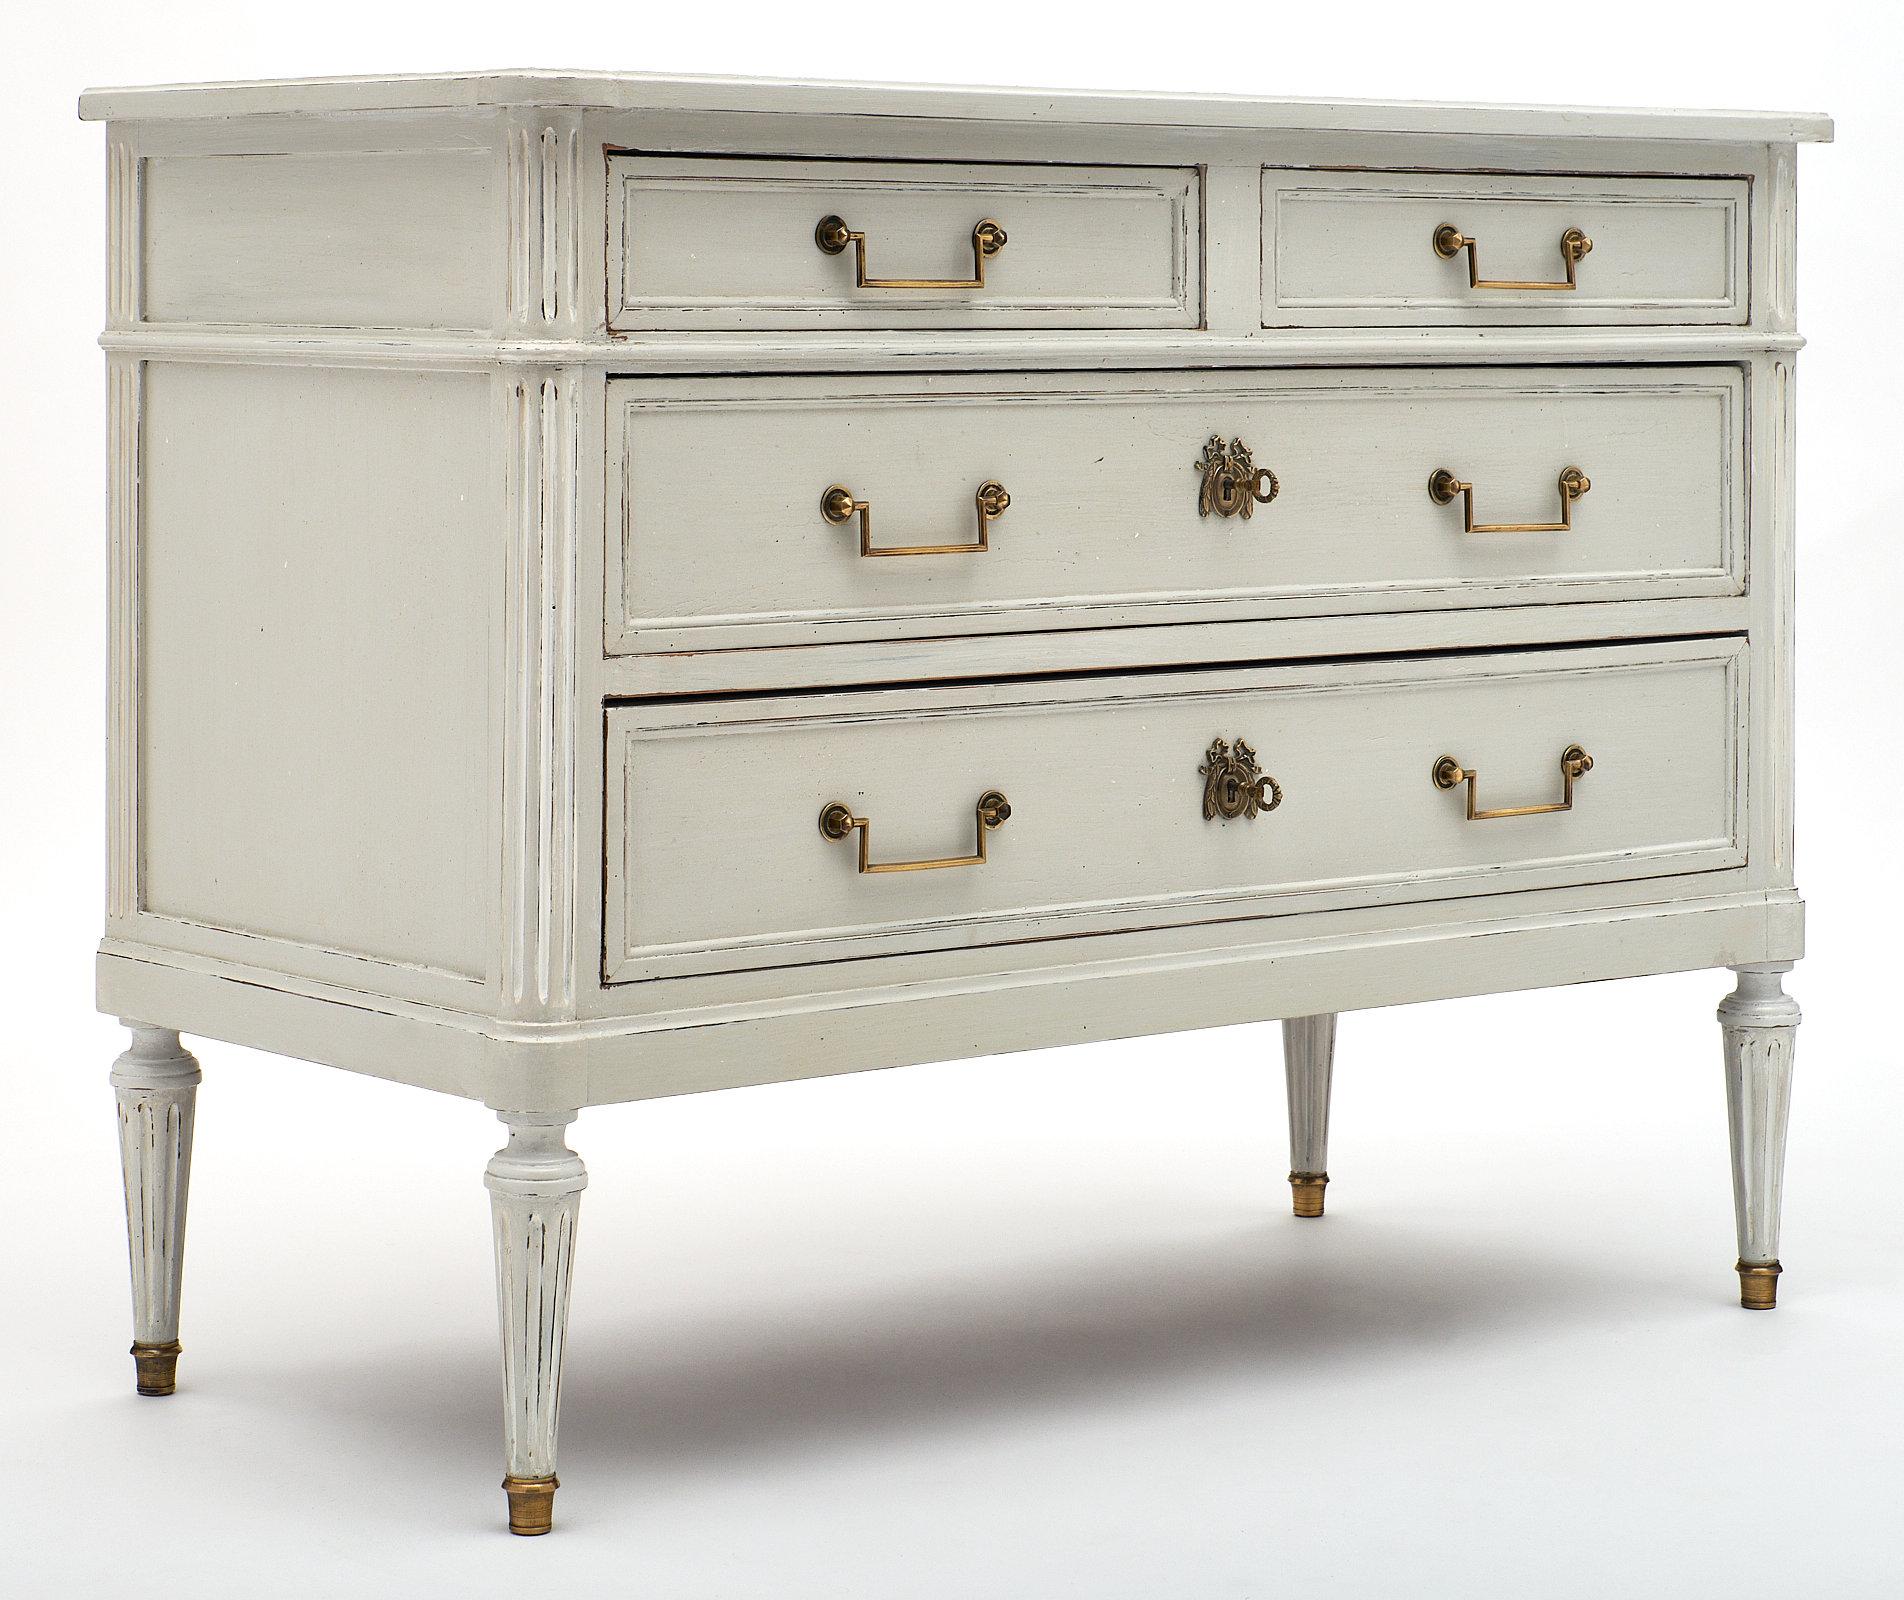 French painted Louis XVI style chest Louis XVI style French painted chest made of solid mahogany. This piece has been hand-painted a gray trianon color and features brass hardware and feet. We love the functionality of the four dovetailed drawers.